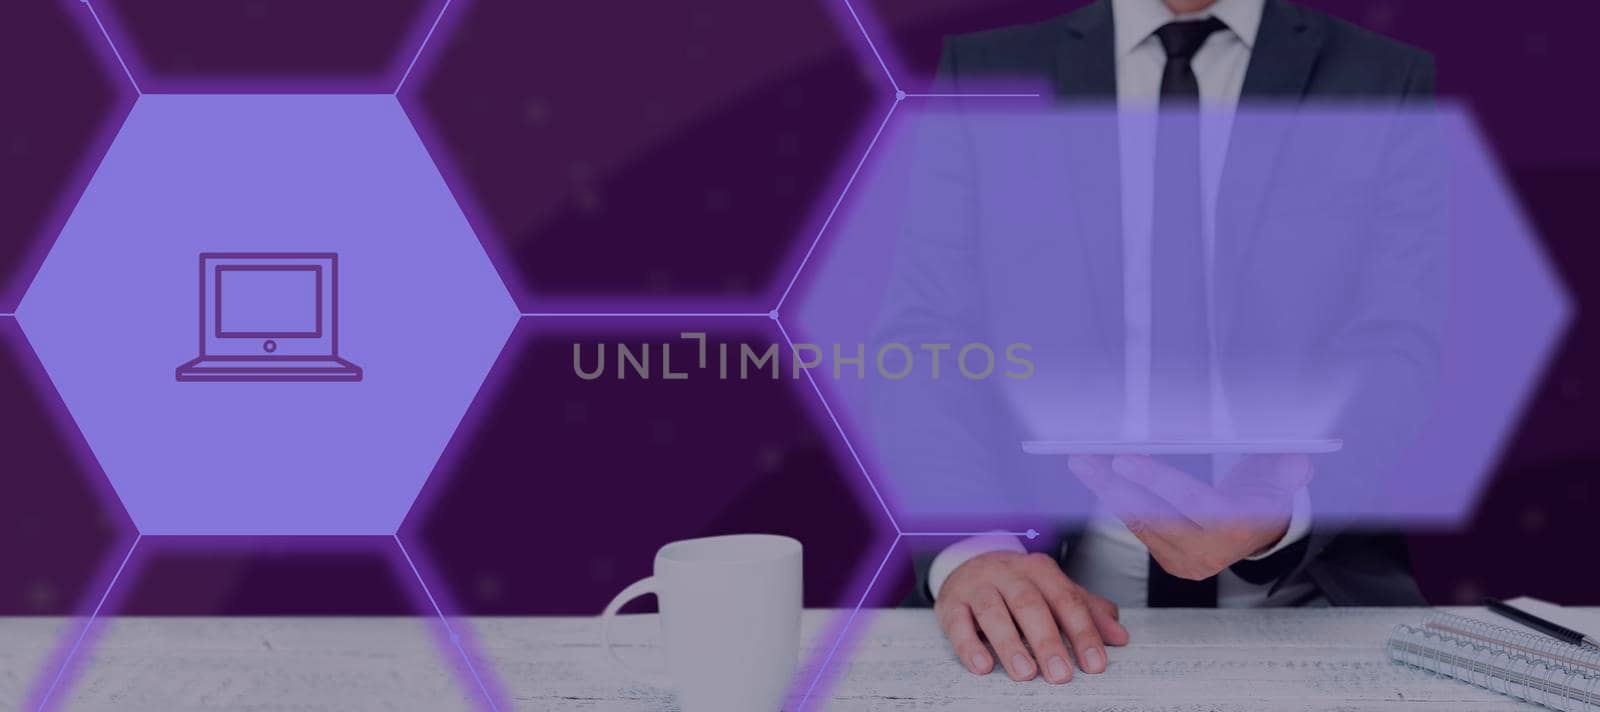 Businessman Holding A Tablet And Showing A Laptop In A Futuristic Hive Pattern. Man In Suit With Pad Presenting Crucial Information And Concepts In A Meeting. by nialowwa